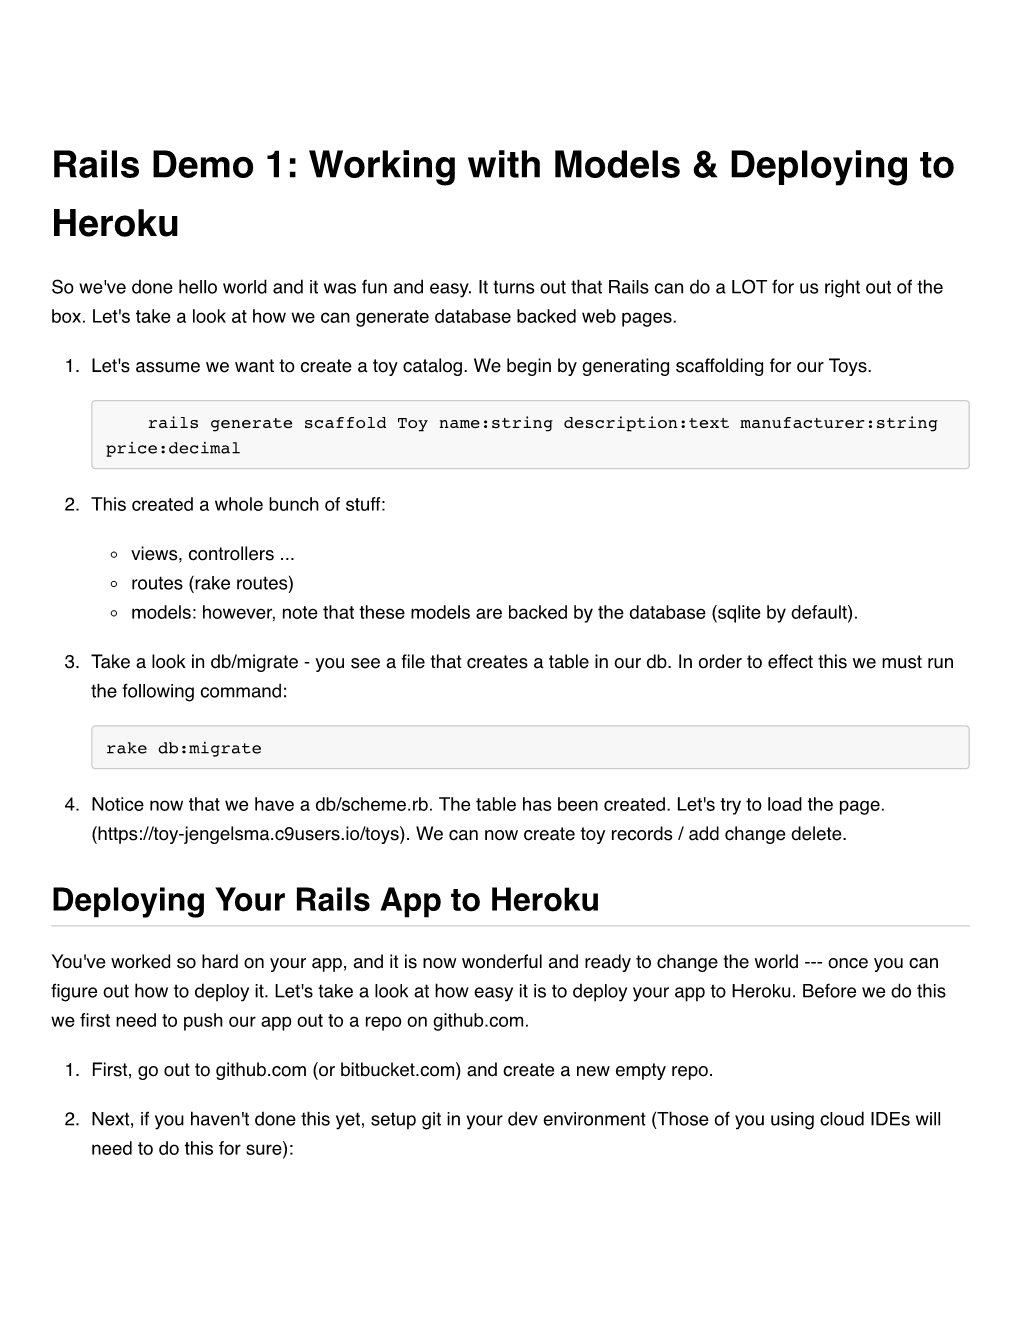 Rails Demo 1: Working with Models & Deploying to Heroku